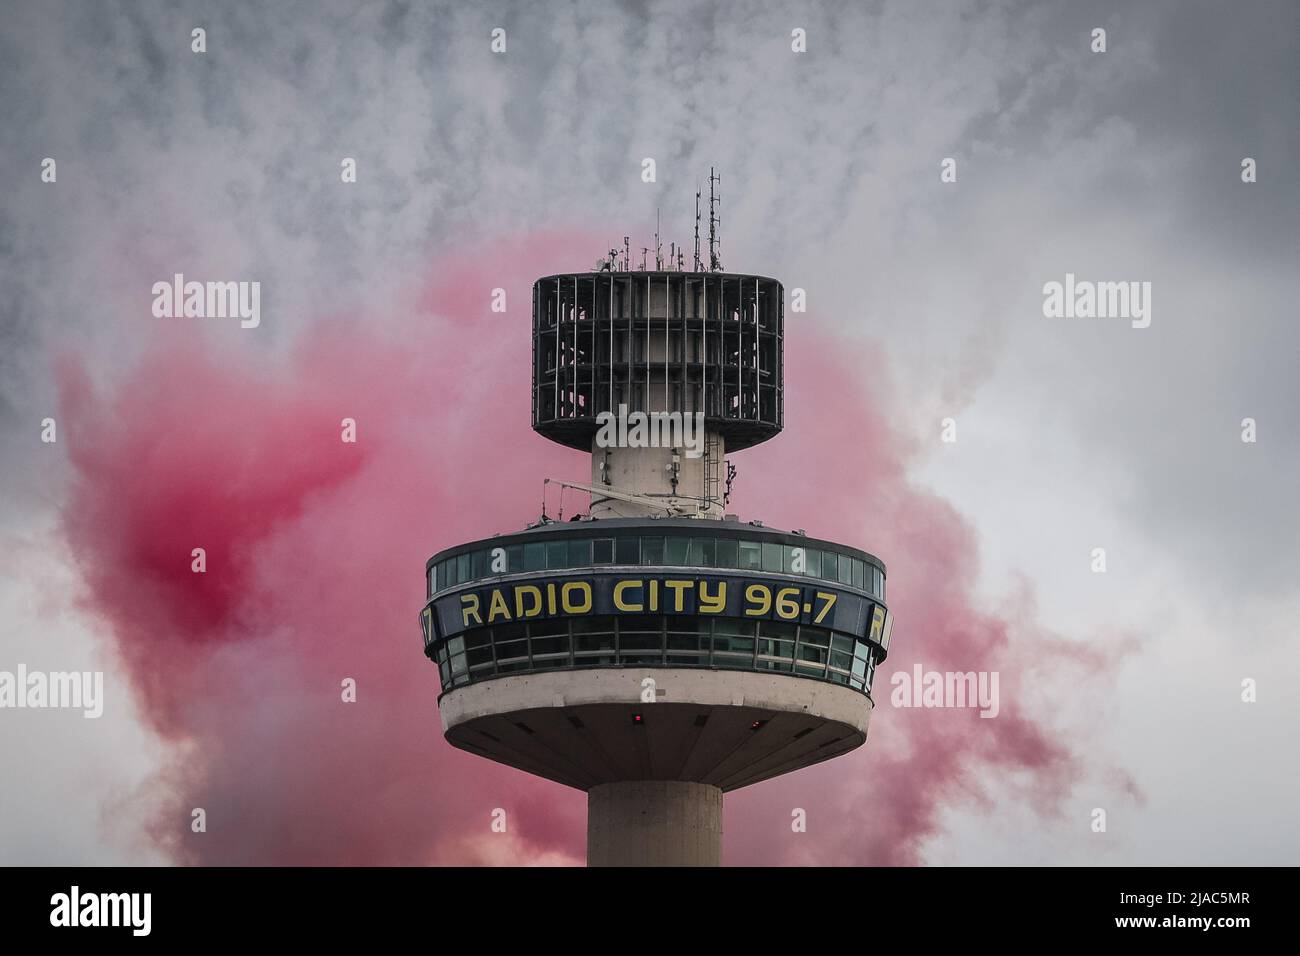 The Radio City 96.7 lets off fireworks and flares as the Liverpool FC squad celebrate during the open top bus parade through the city after winning both the Carabao Cup and the FA Cup in the 2021/22 season Stock Photo